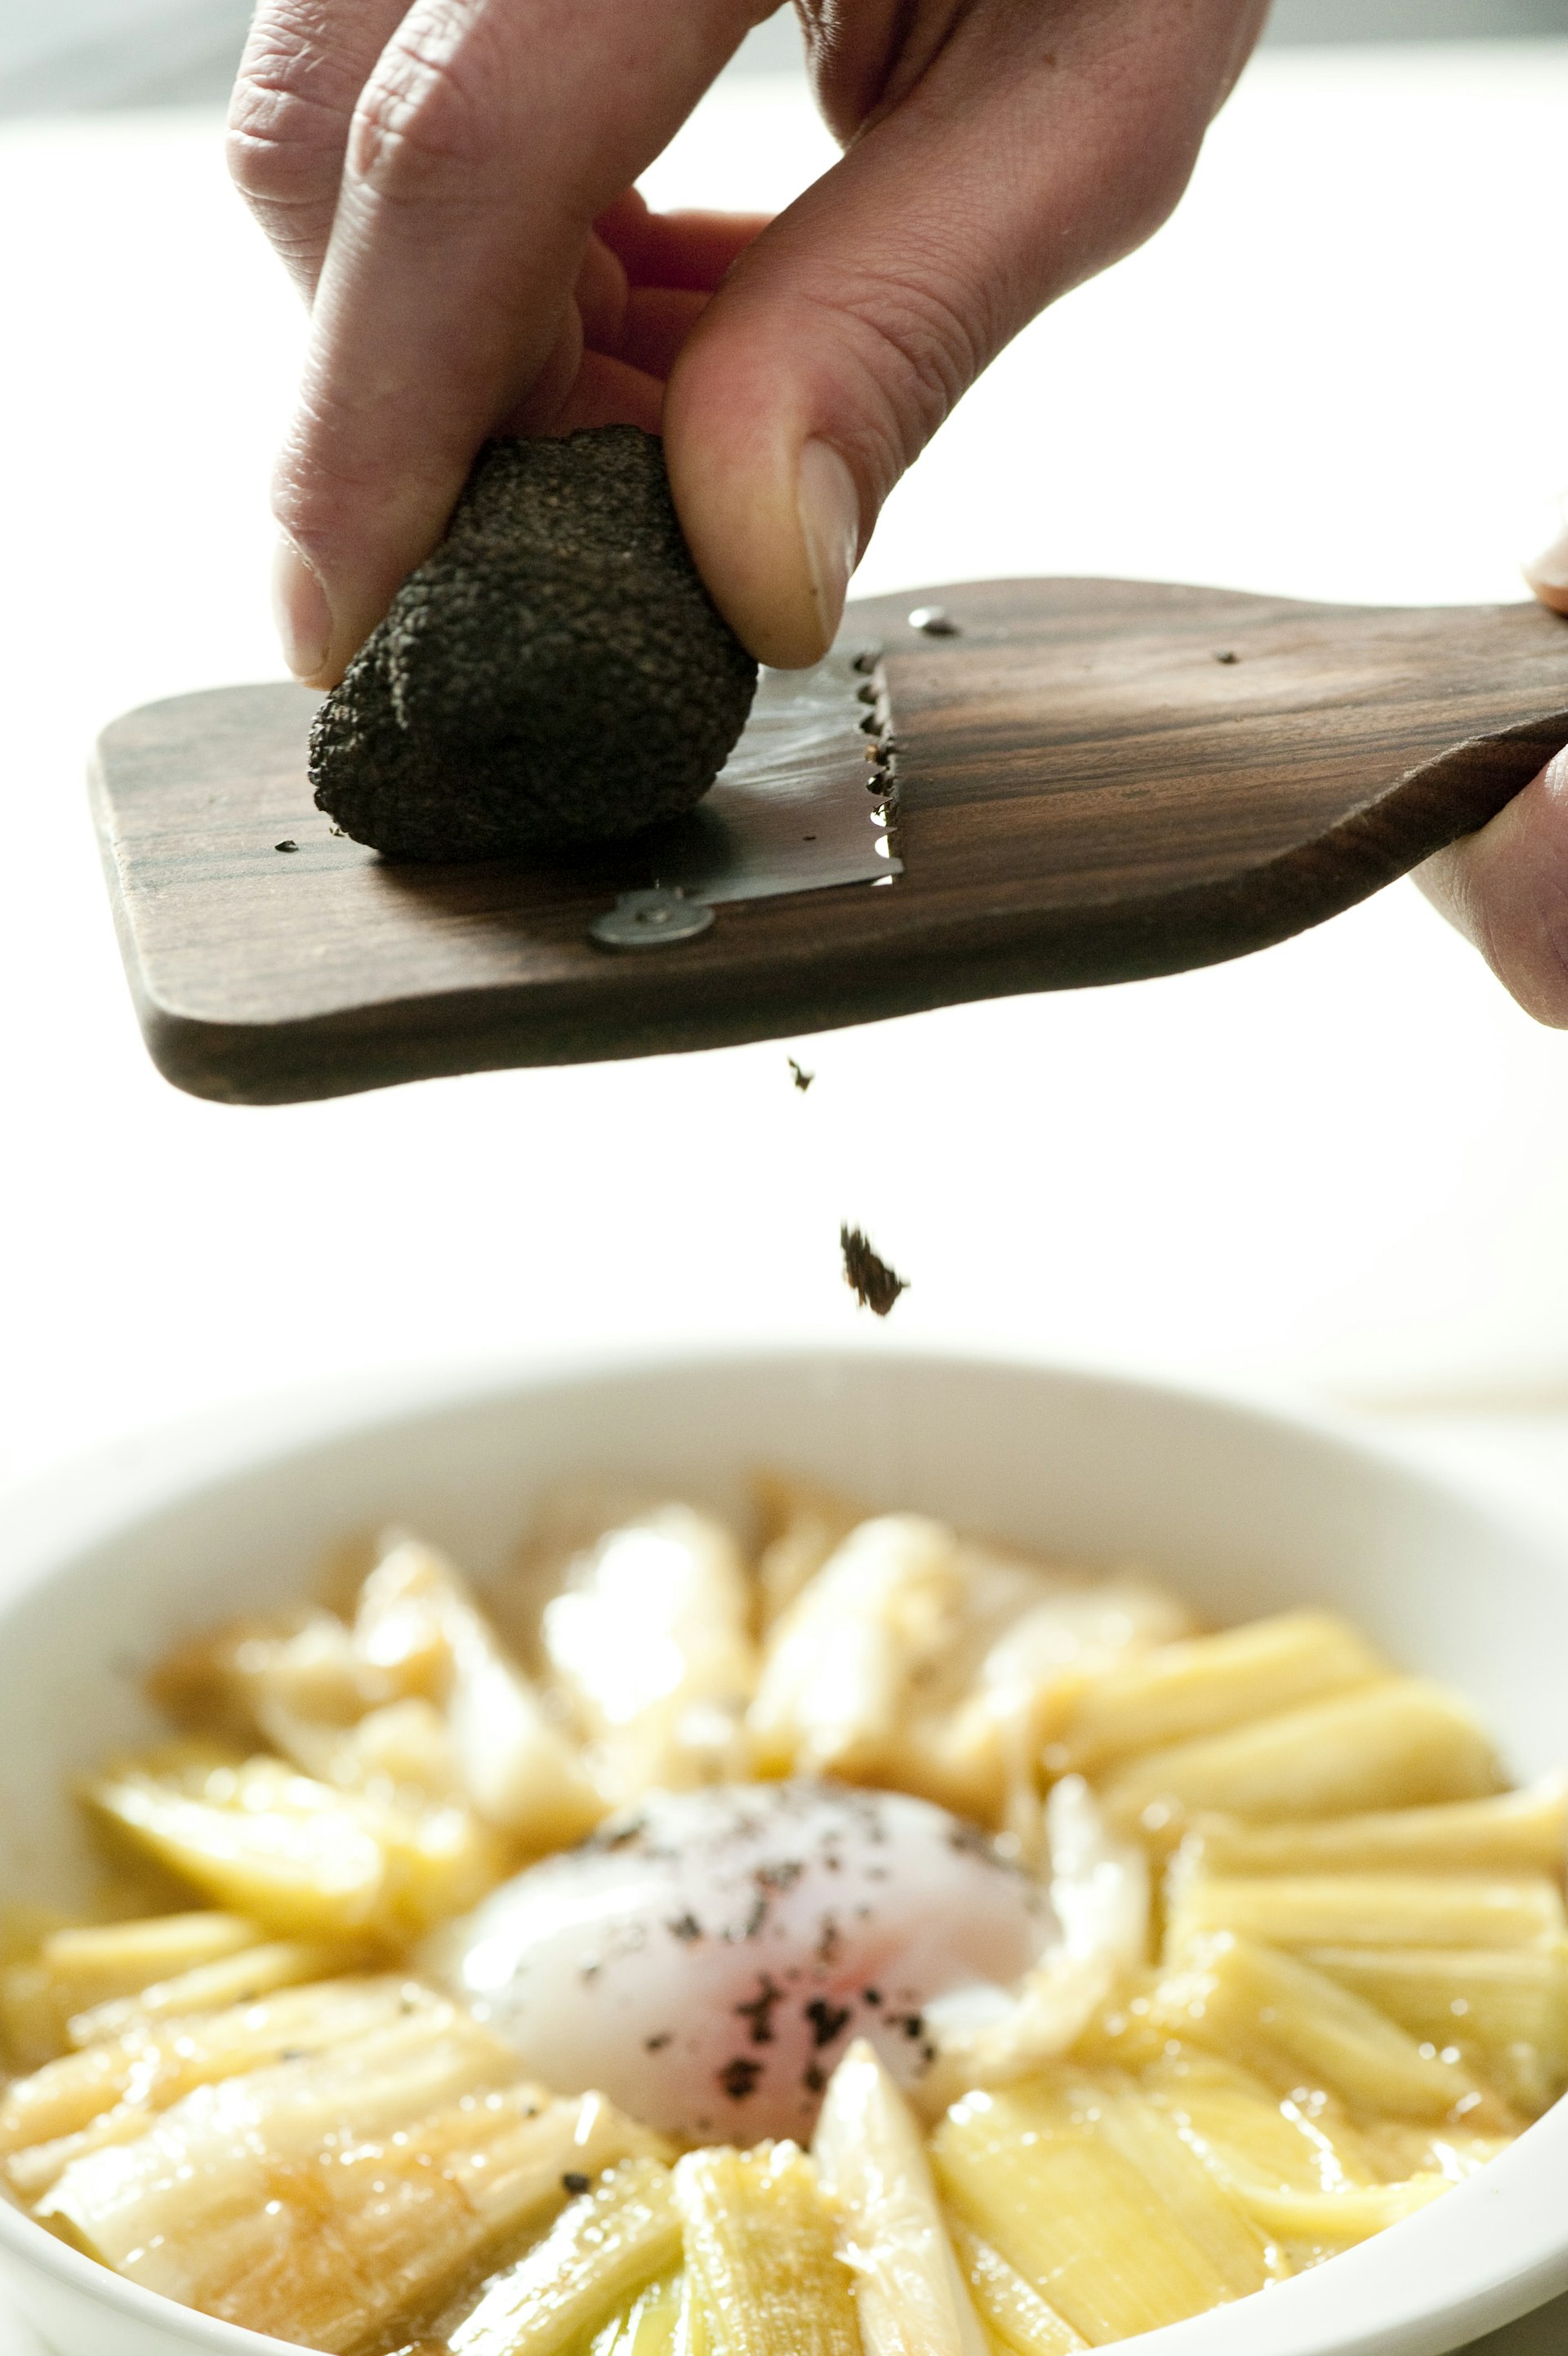 shaving black truffle over braised leeks, poached eggs & black truffle cocotte ©Susan Wright/Lonely Planet